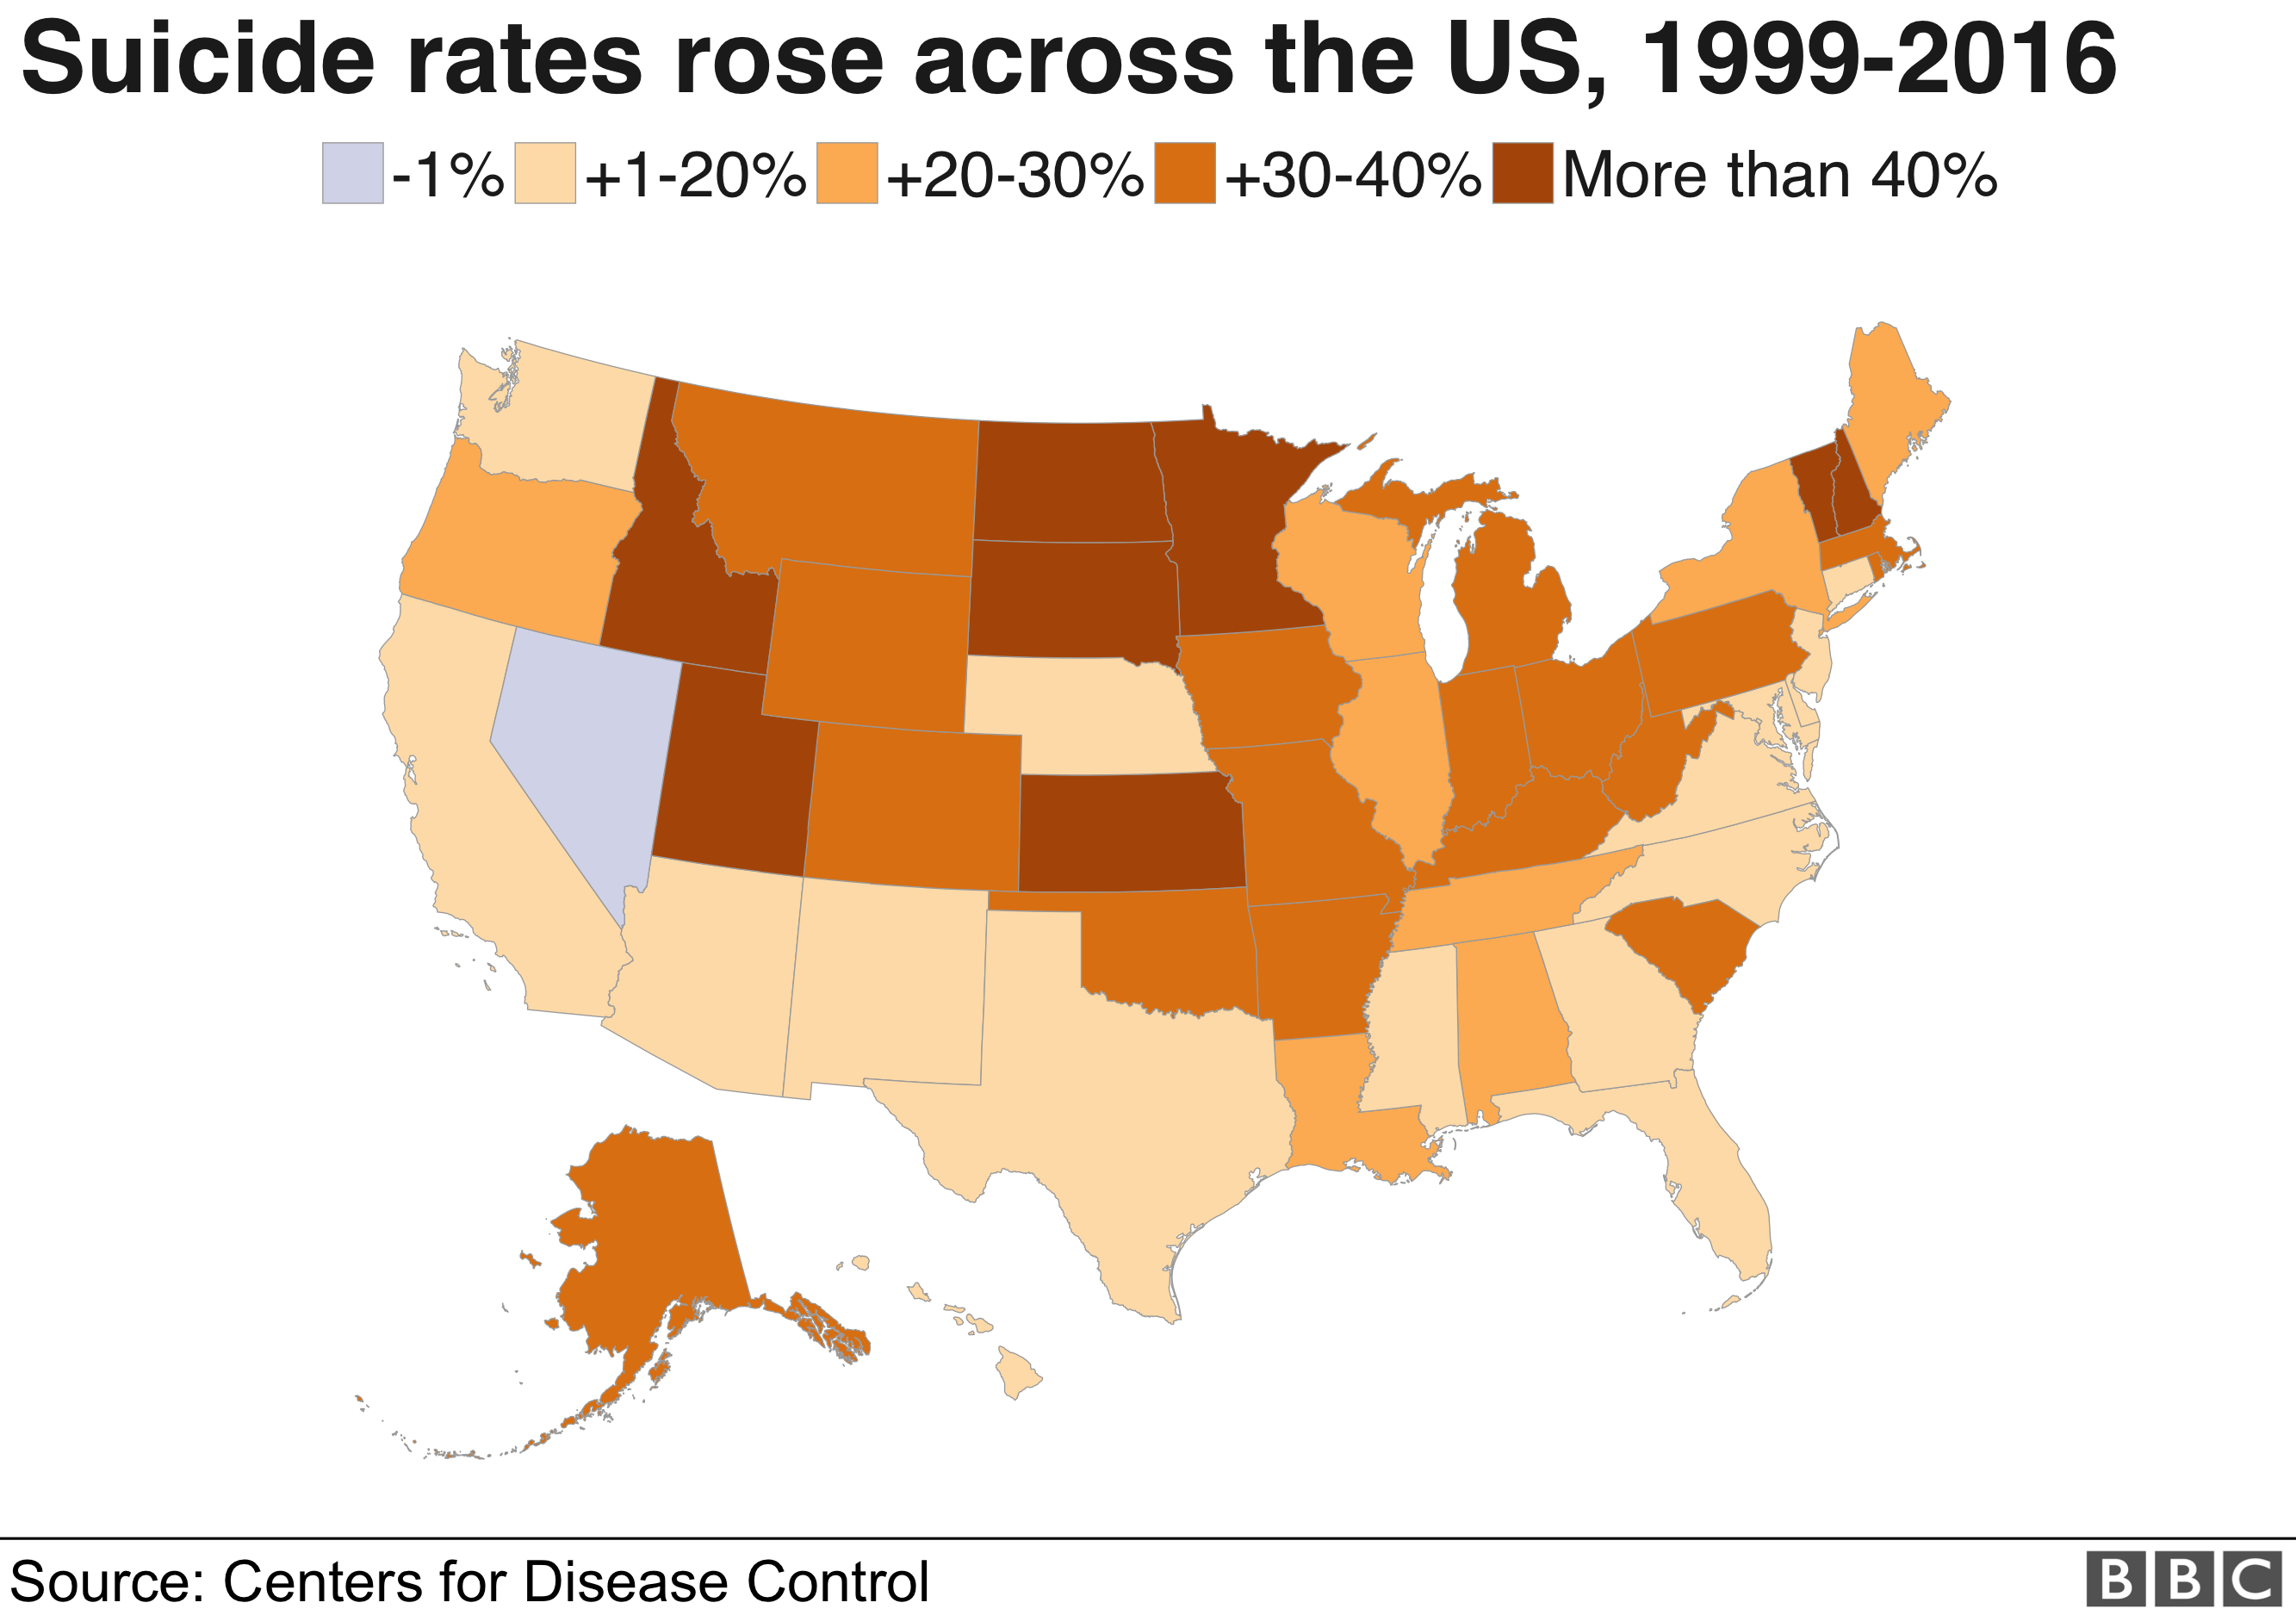 Map showing state-level suicide rate increases across the US